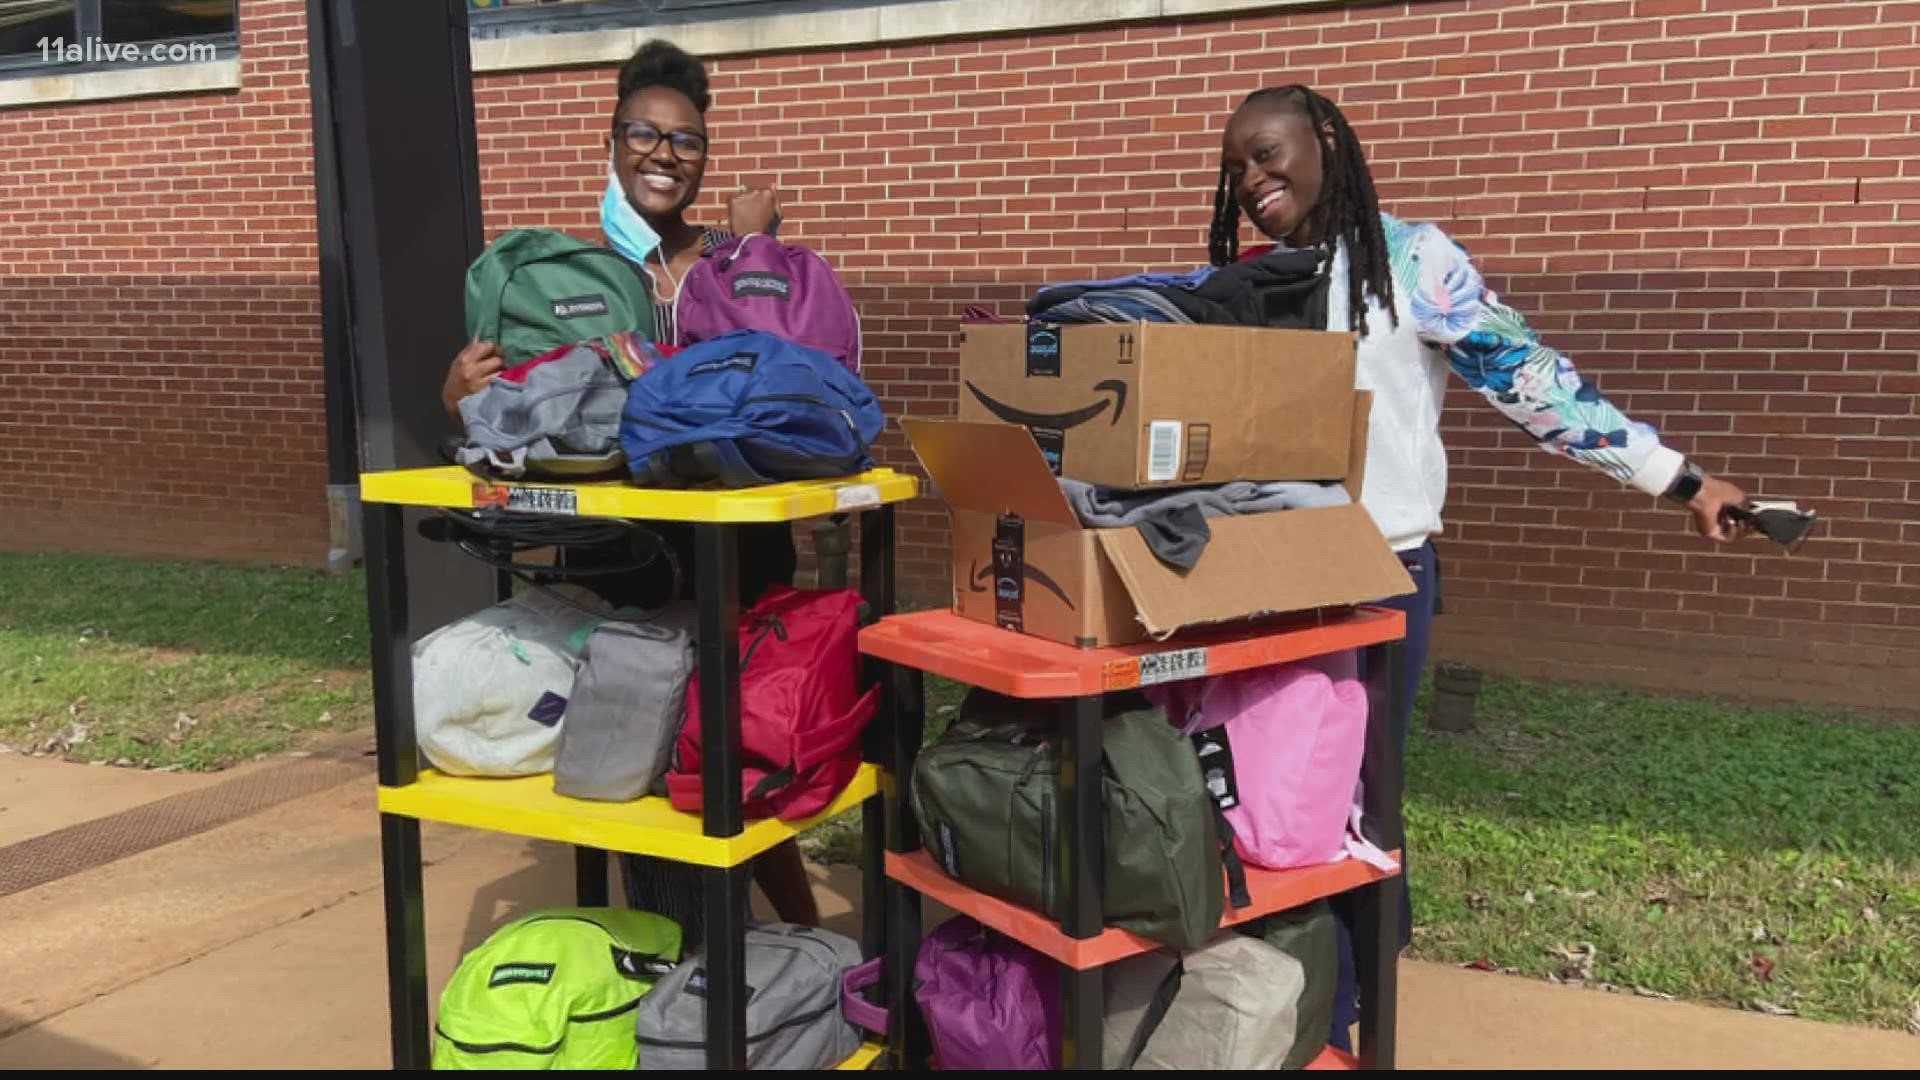 They are donating backpacks full of basics, like toothpaste and blankets, to homeless students